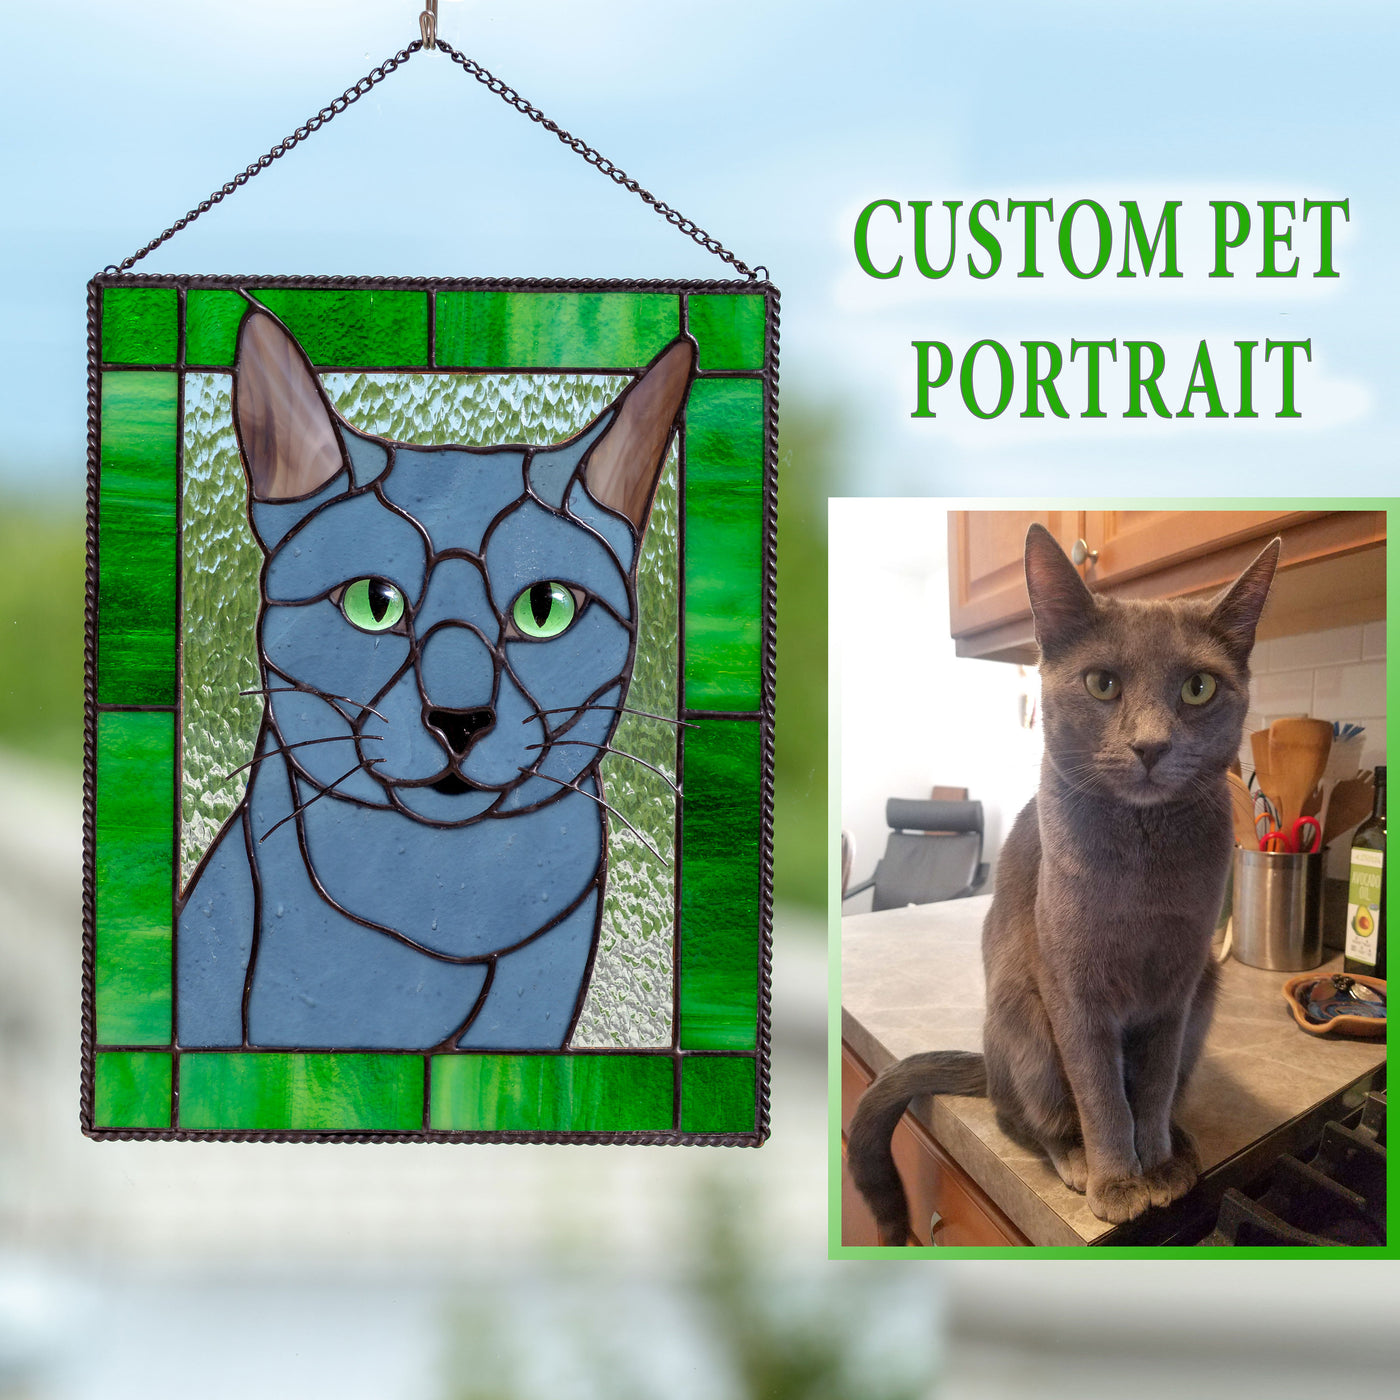 Rectangular stained glass portrait of a cat in a green frame